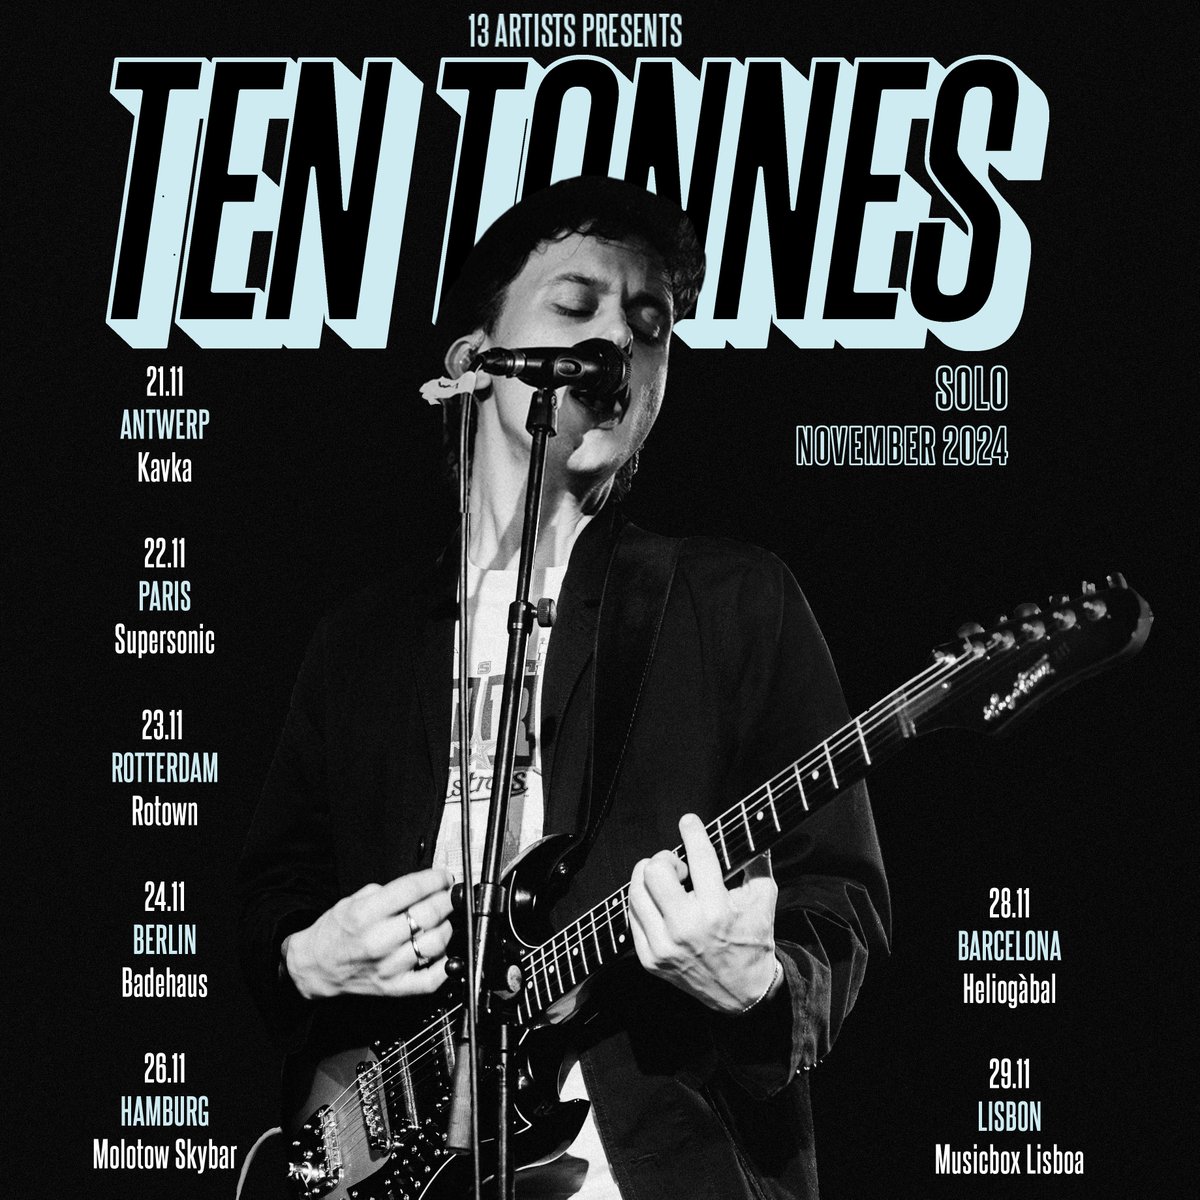 !ANNOUNCMENT! @ten_tonnes has just announced seven solo EU tour dates he will be playing this November 2024! 🔥